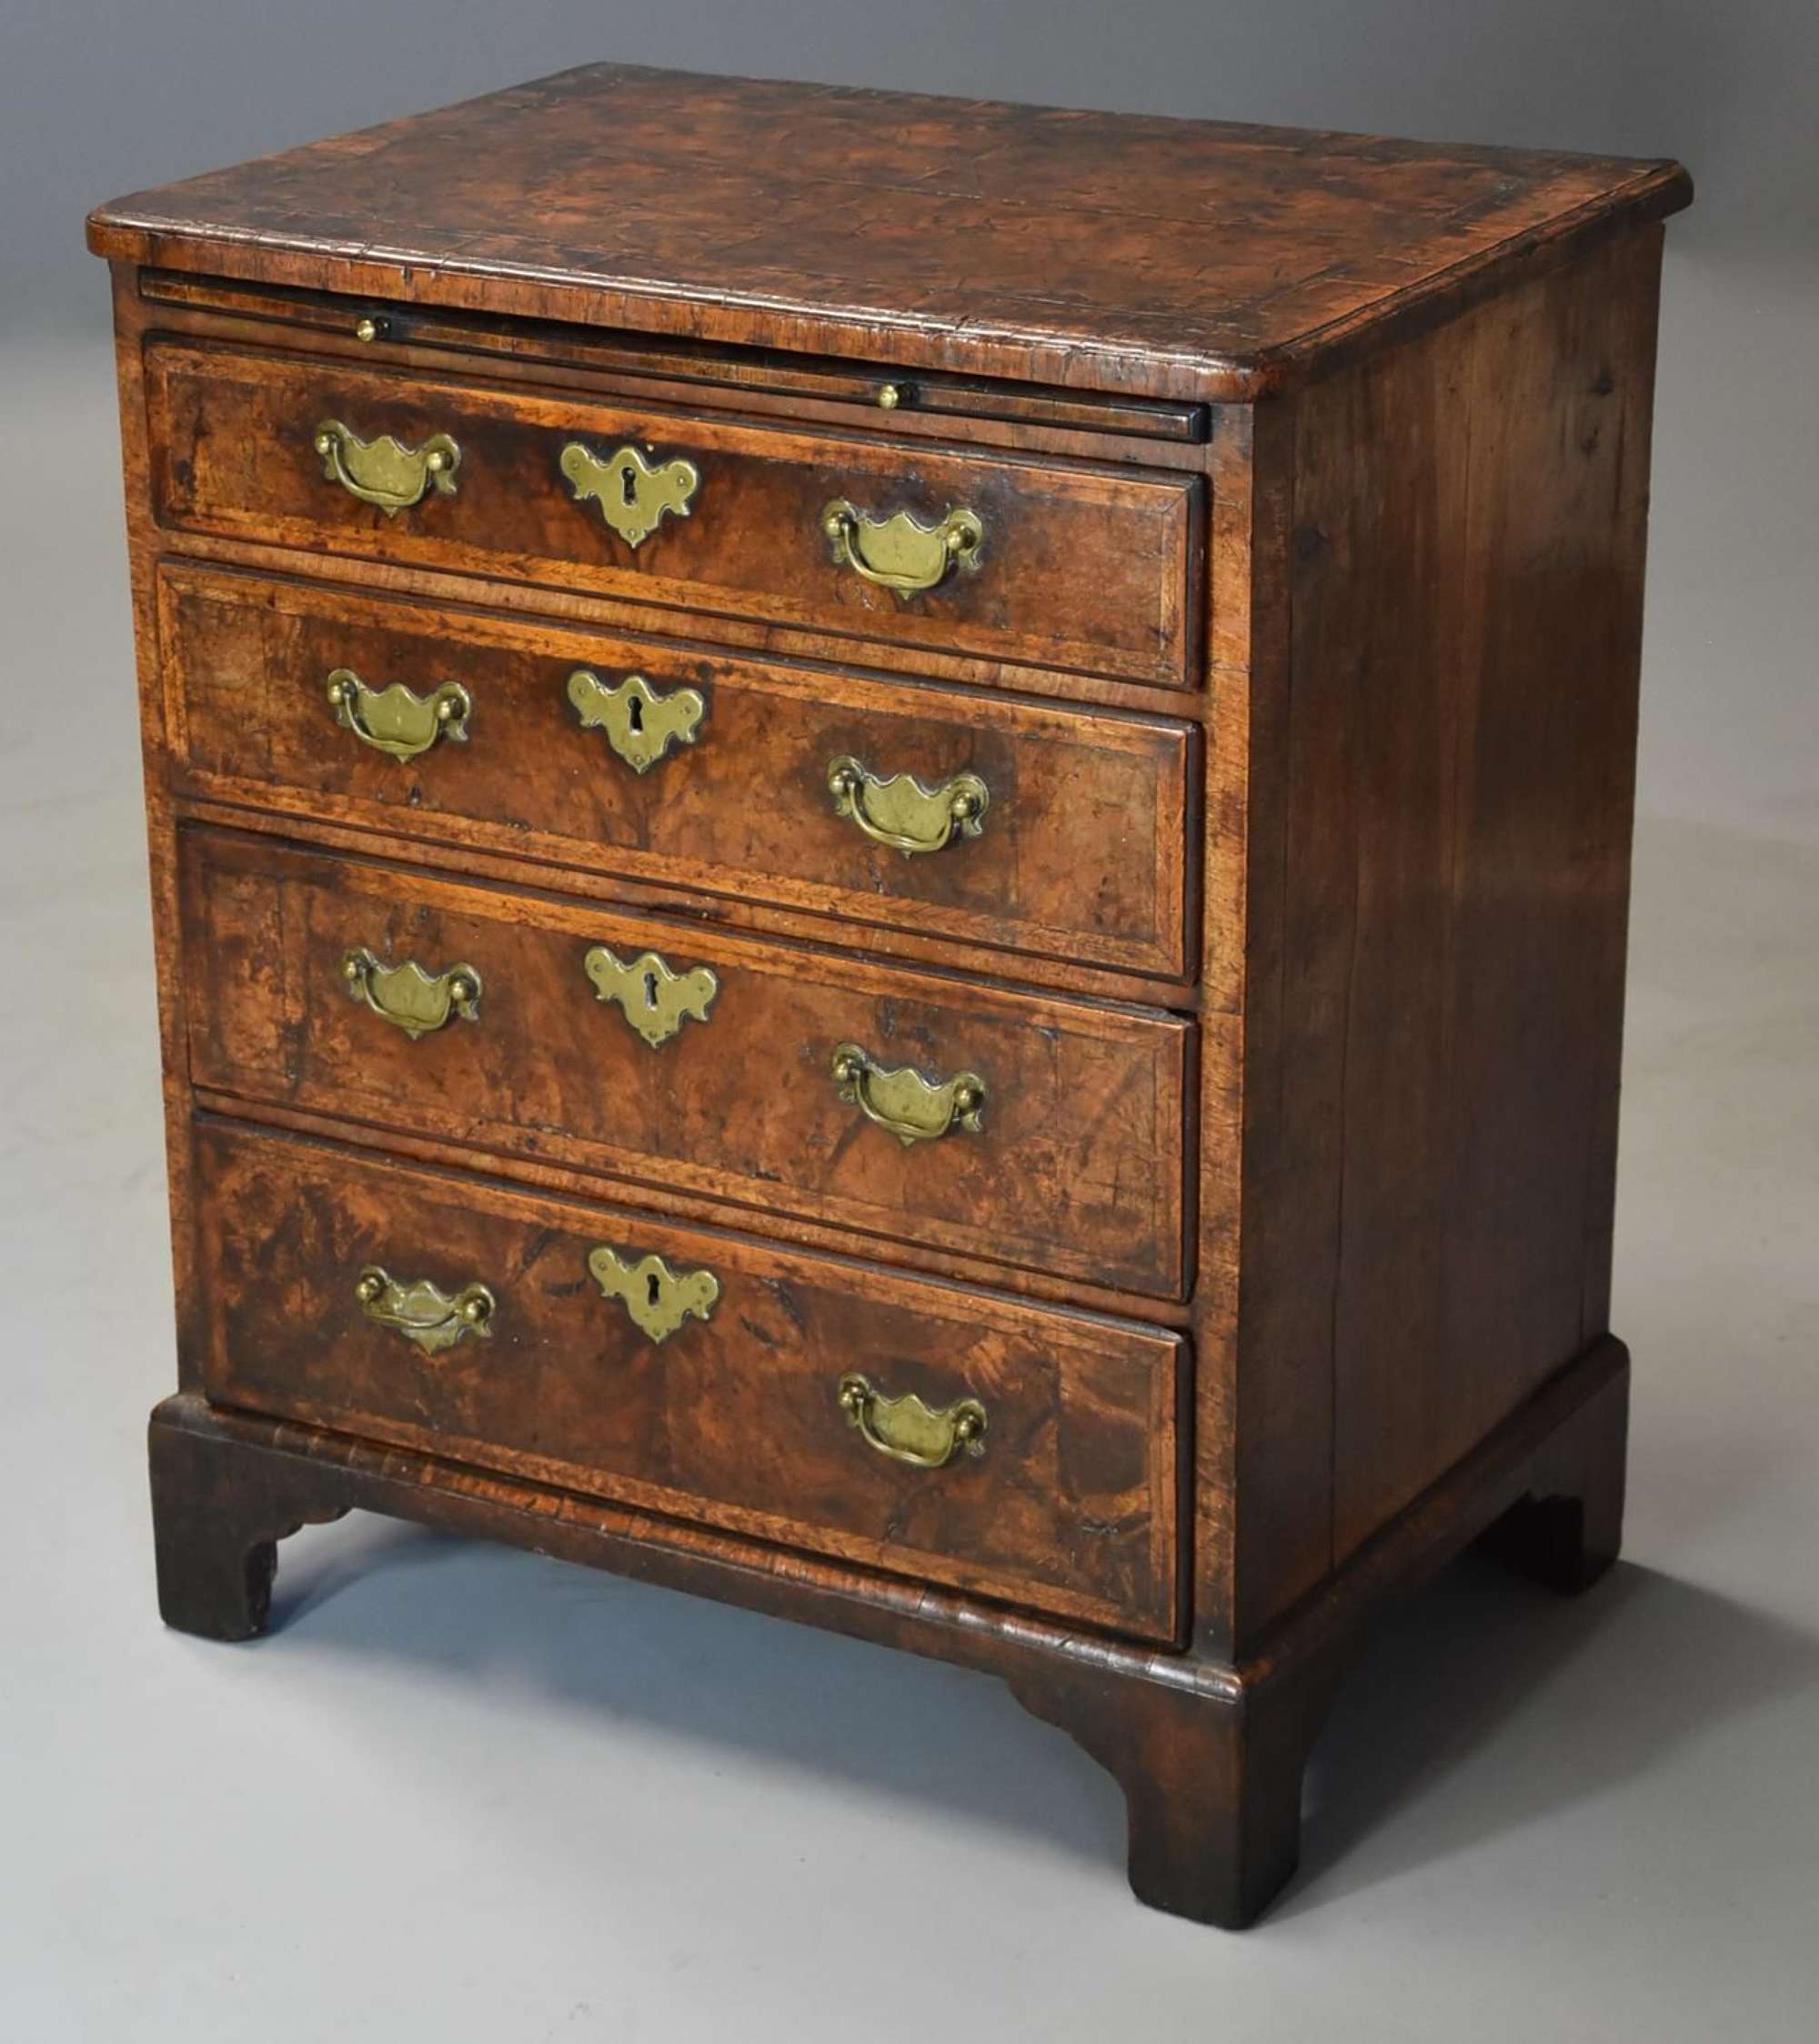 Extremely rare 18thc walnut chest of drawers in untouched condition